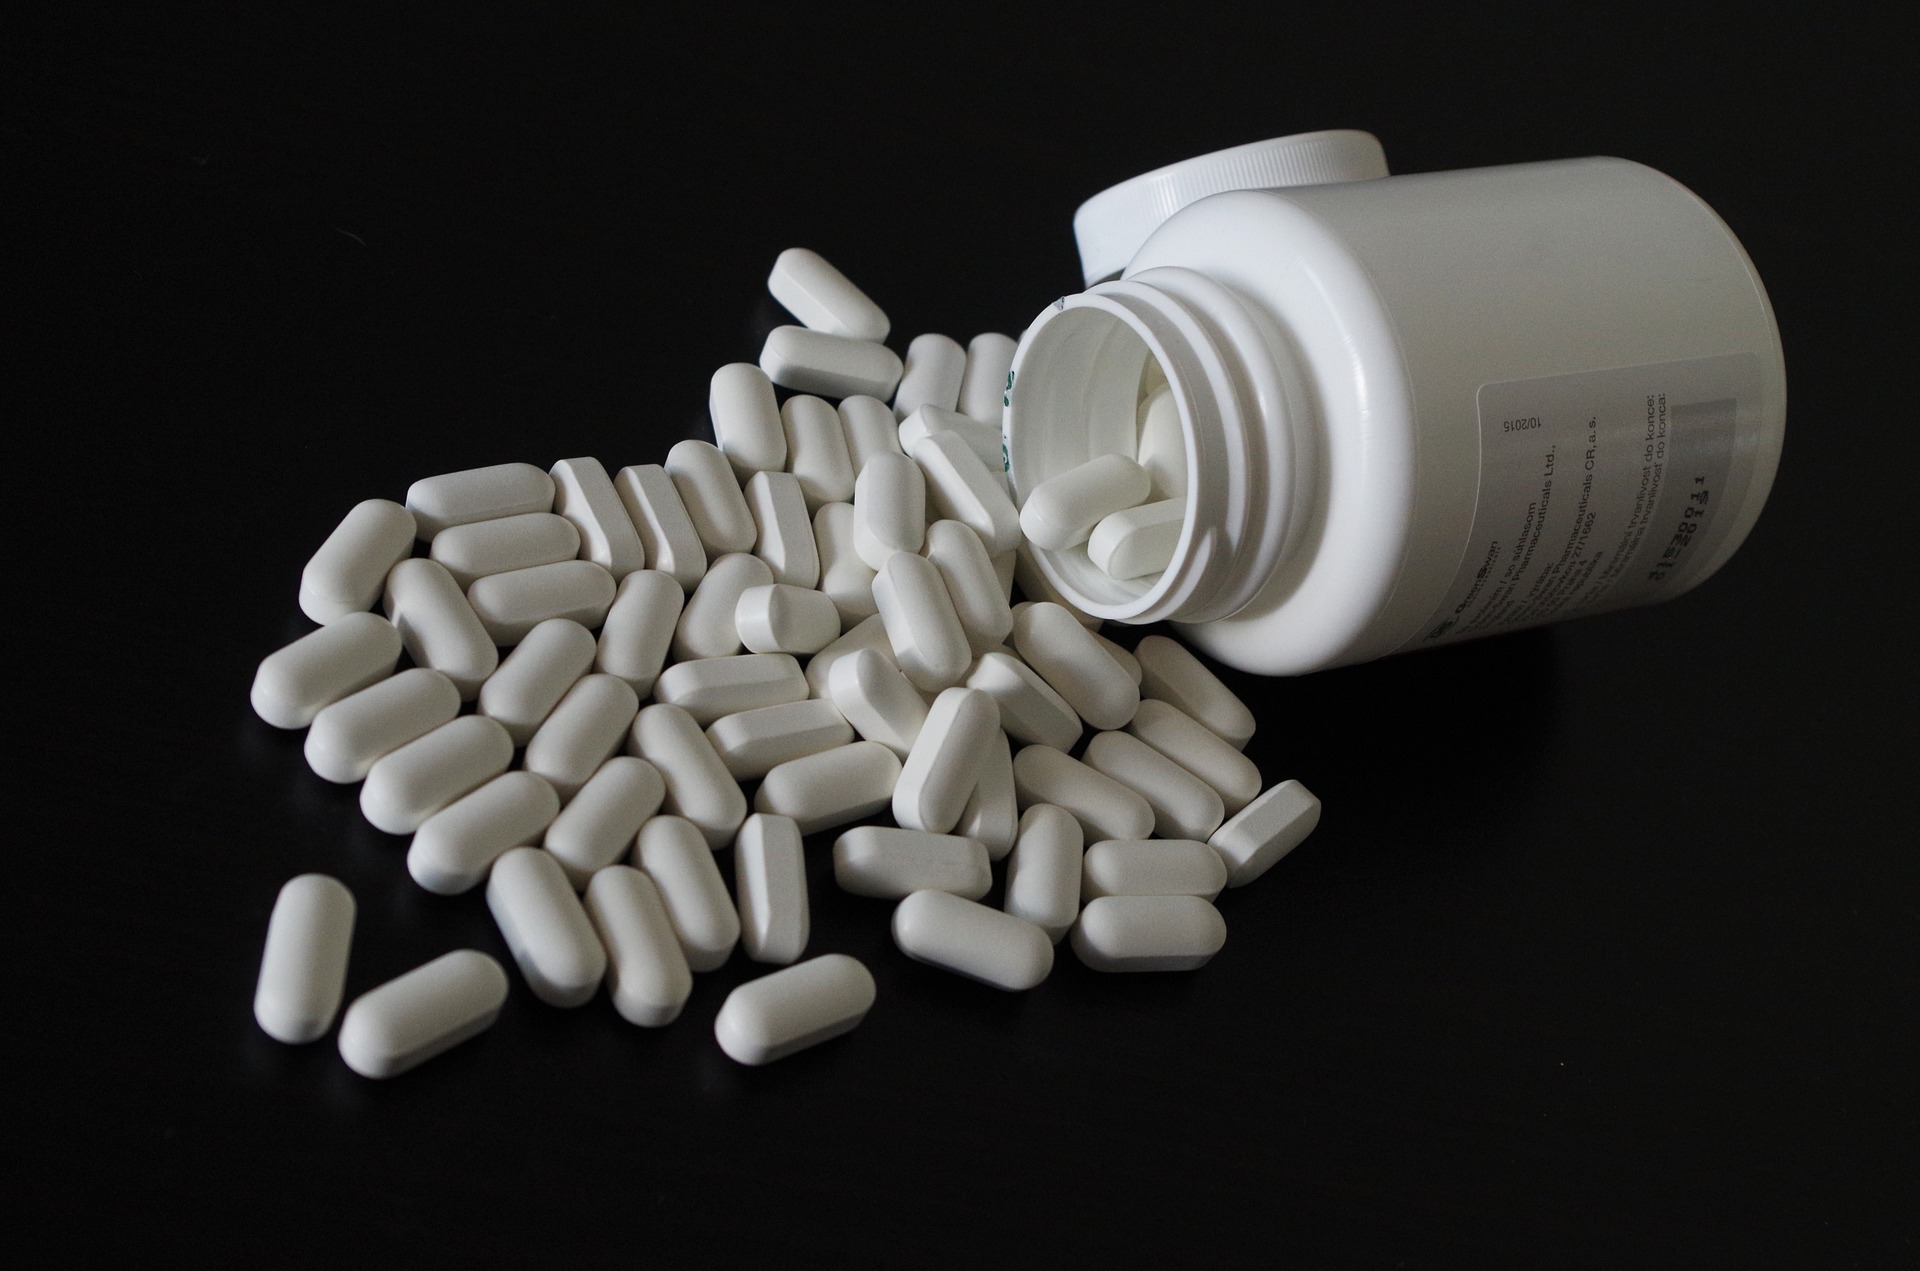 Taking painkillers with sleeping pills is an increasingly risky ...